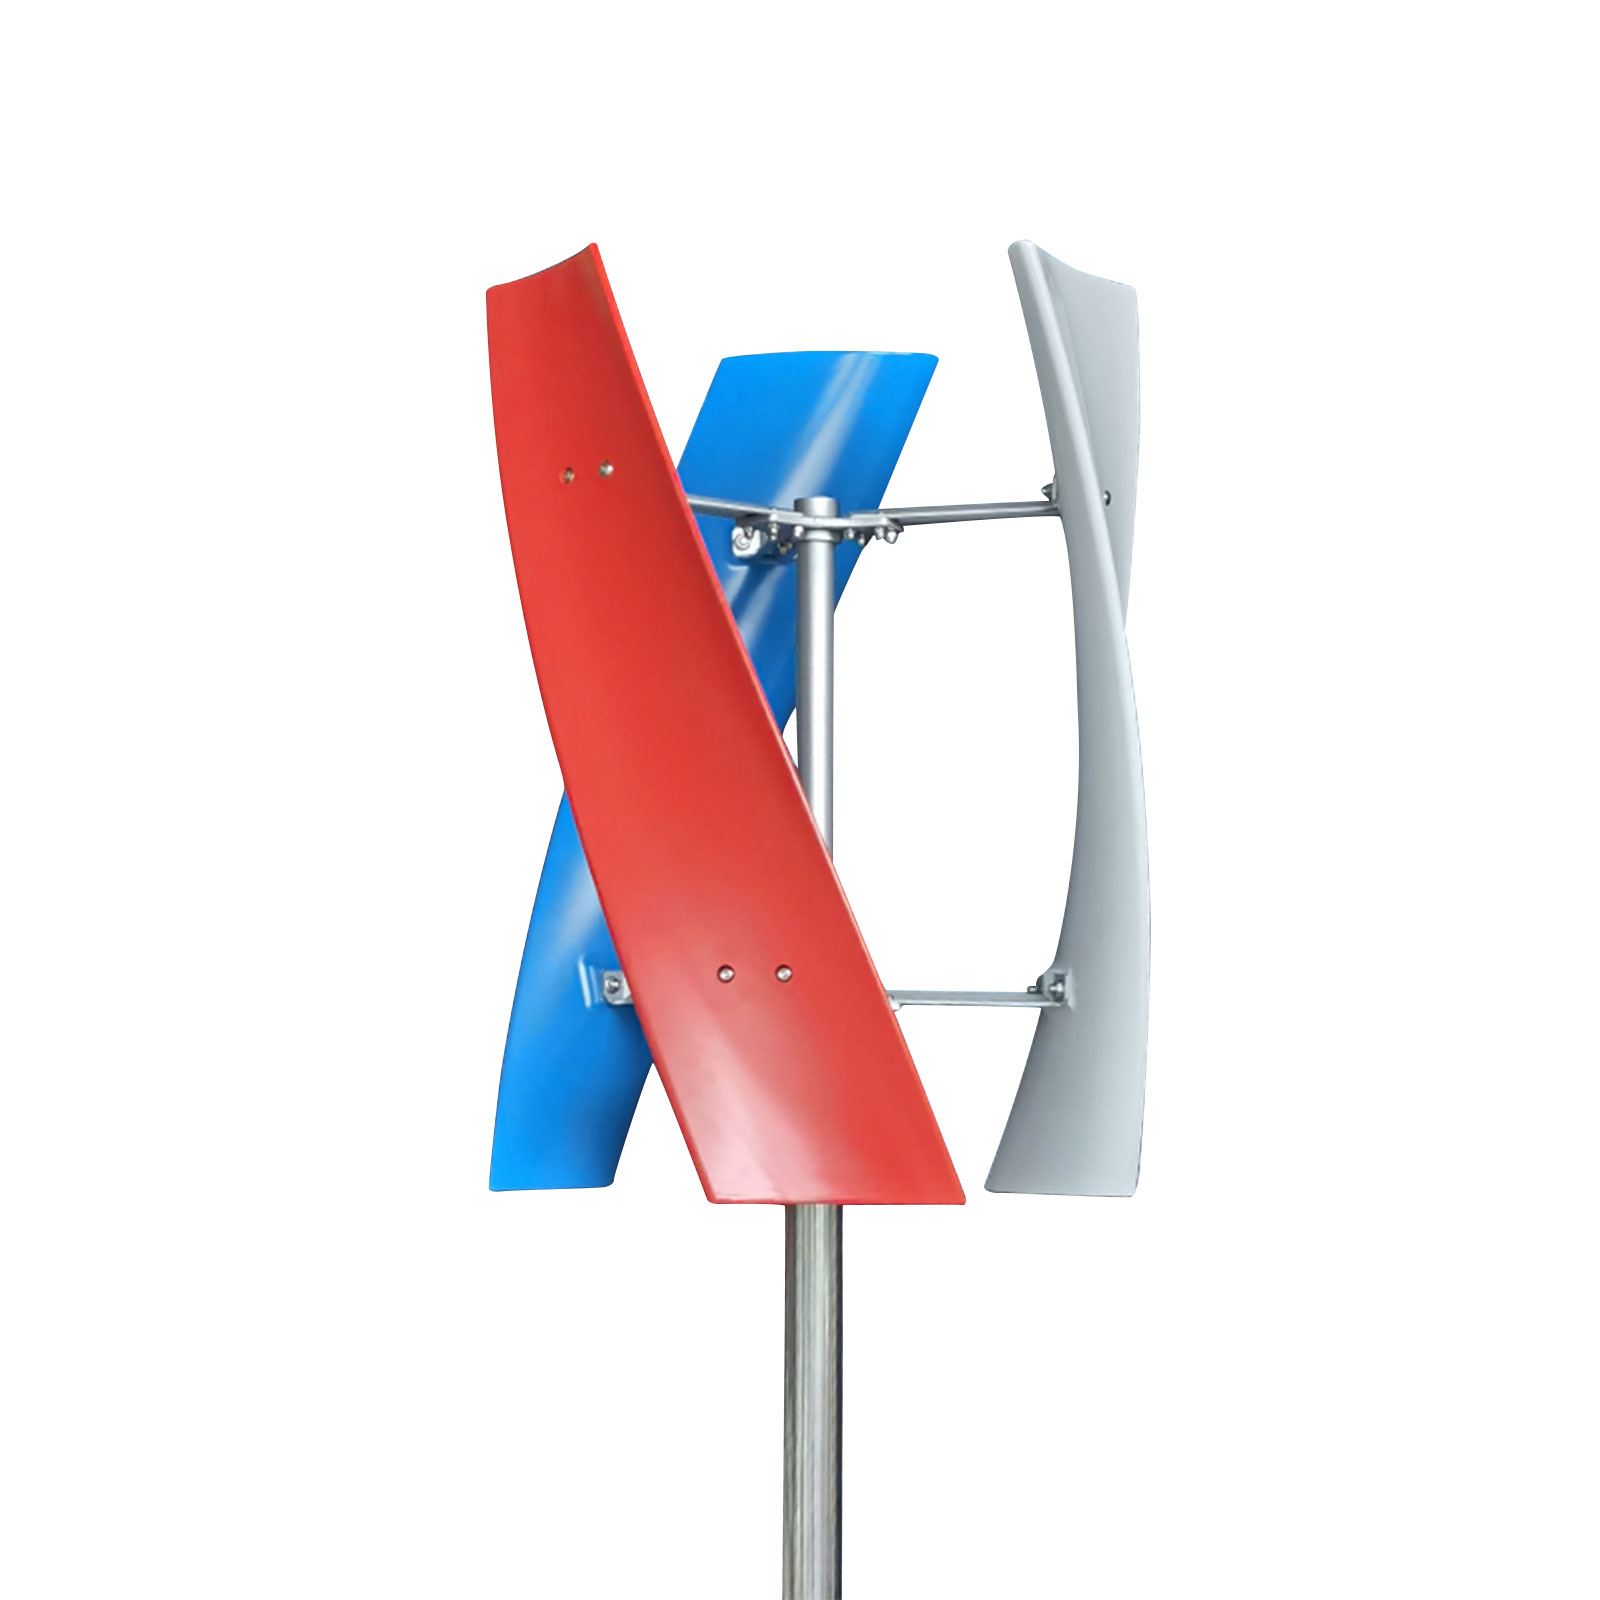 TdiriNar Vertical Wind Turbine Generator, 12V 400W Portable 3-Blade Powerful Helix Wind Generator Kit, 1.3m/s Coreless Generator With Starting Wind Speed Suitable For RV Home Industrial Energy